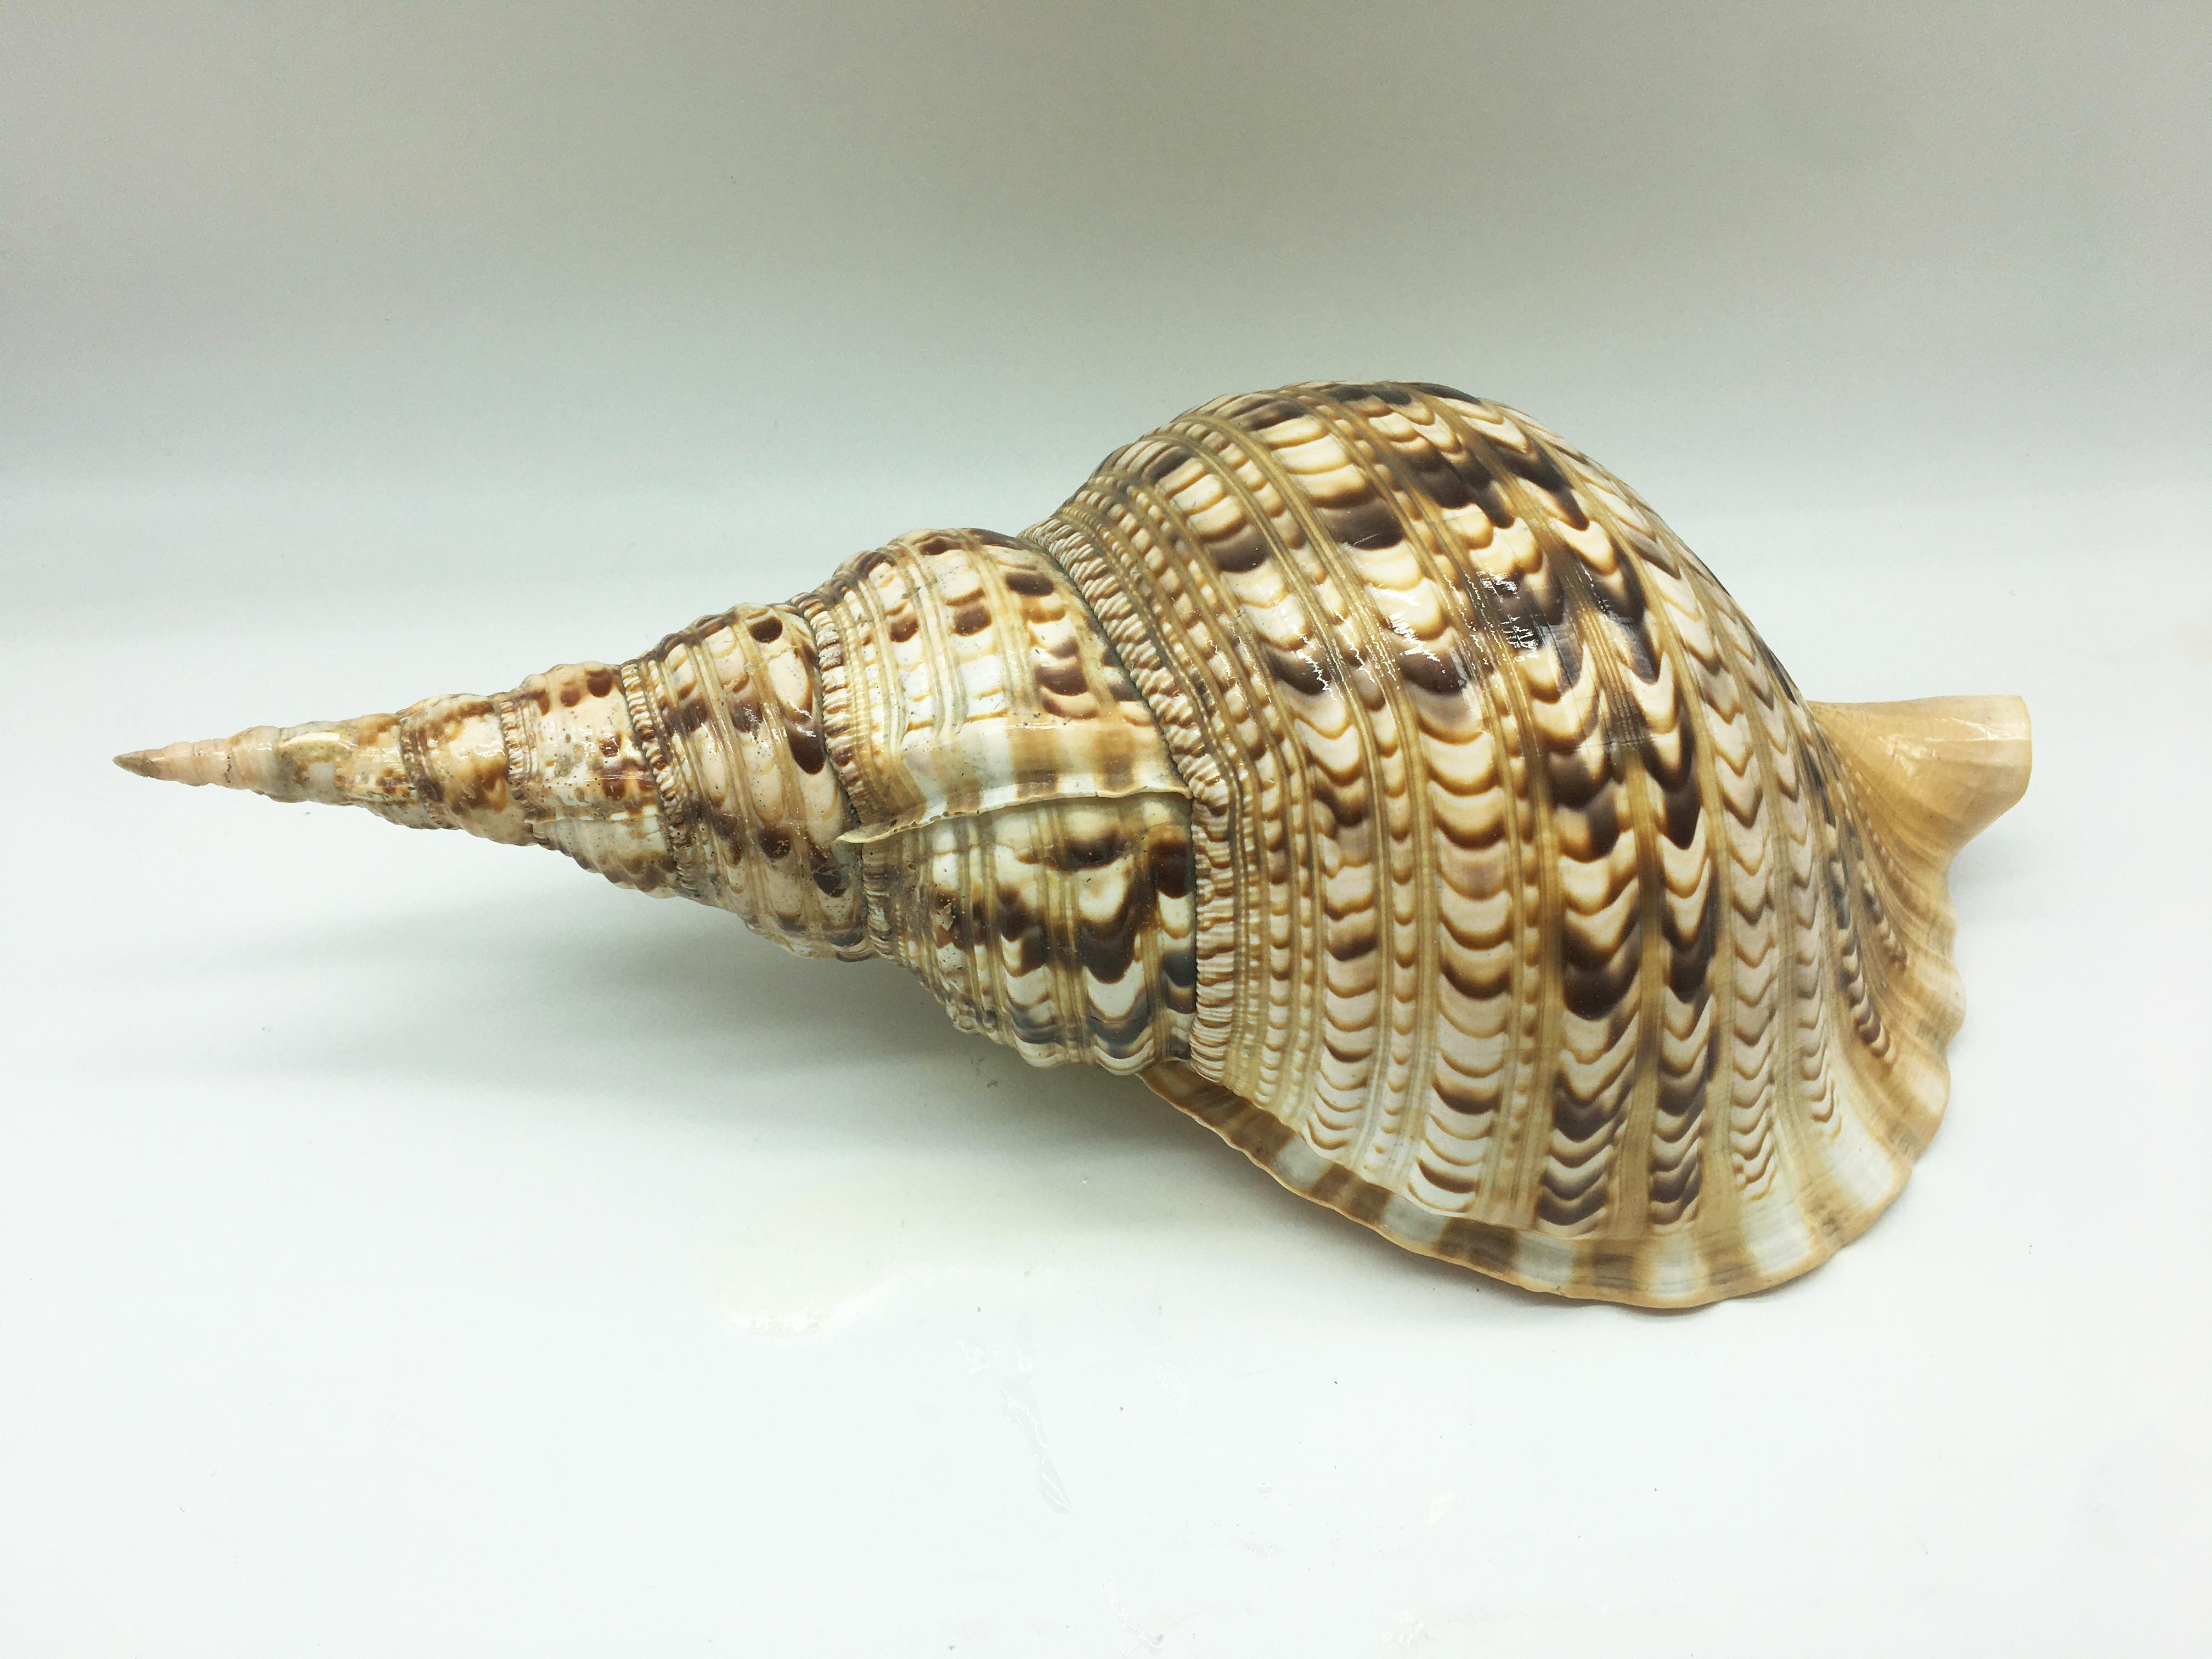 A beautiful natural specimen, Charonia is a genus of very large sea snail, commonly known as Triton's trumpet or Triton snail. They are marine gastropod mollusks in the monotypic family Charoniidae.
This species has a wide distribution, it has been